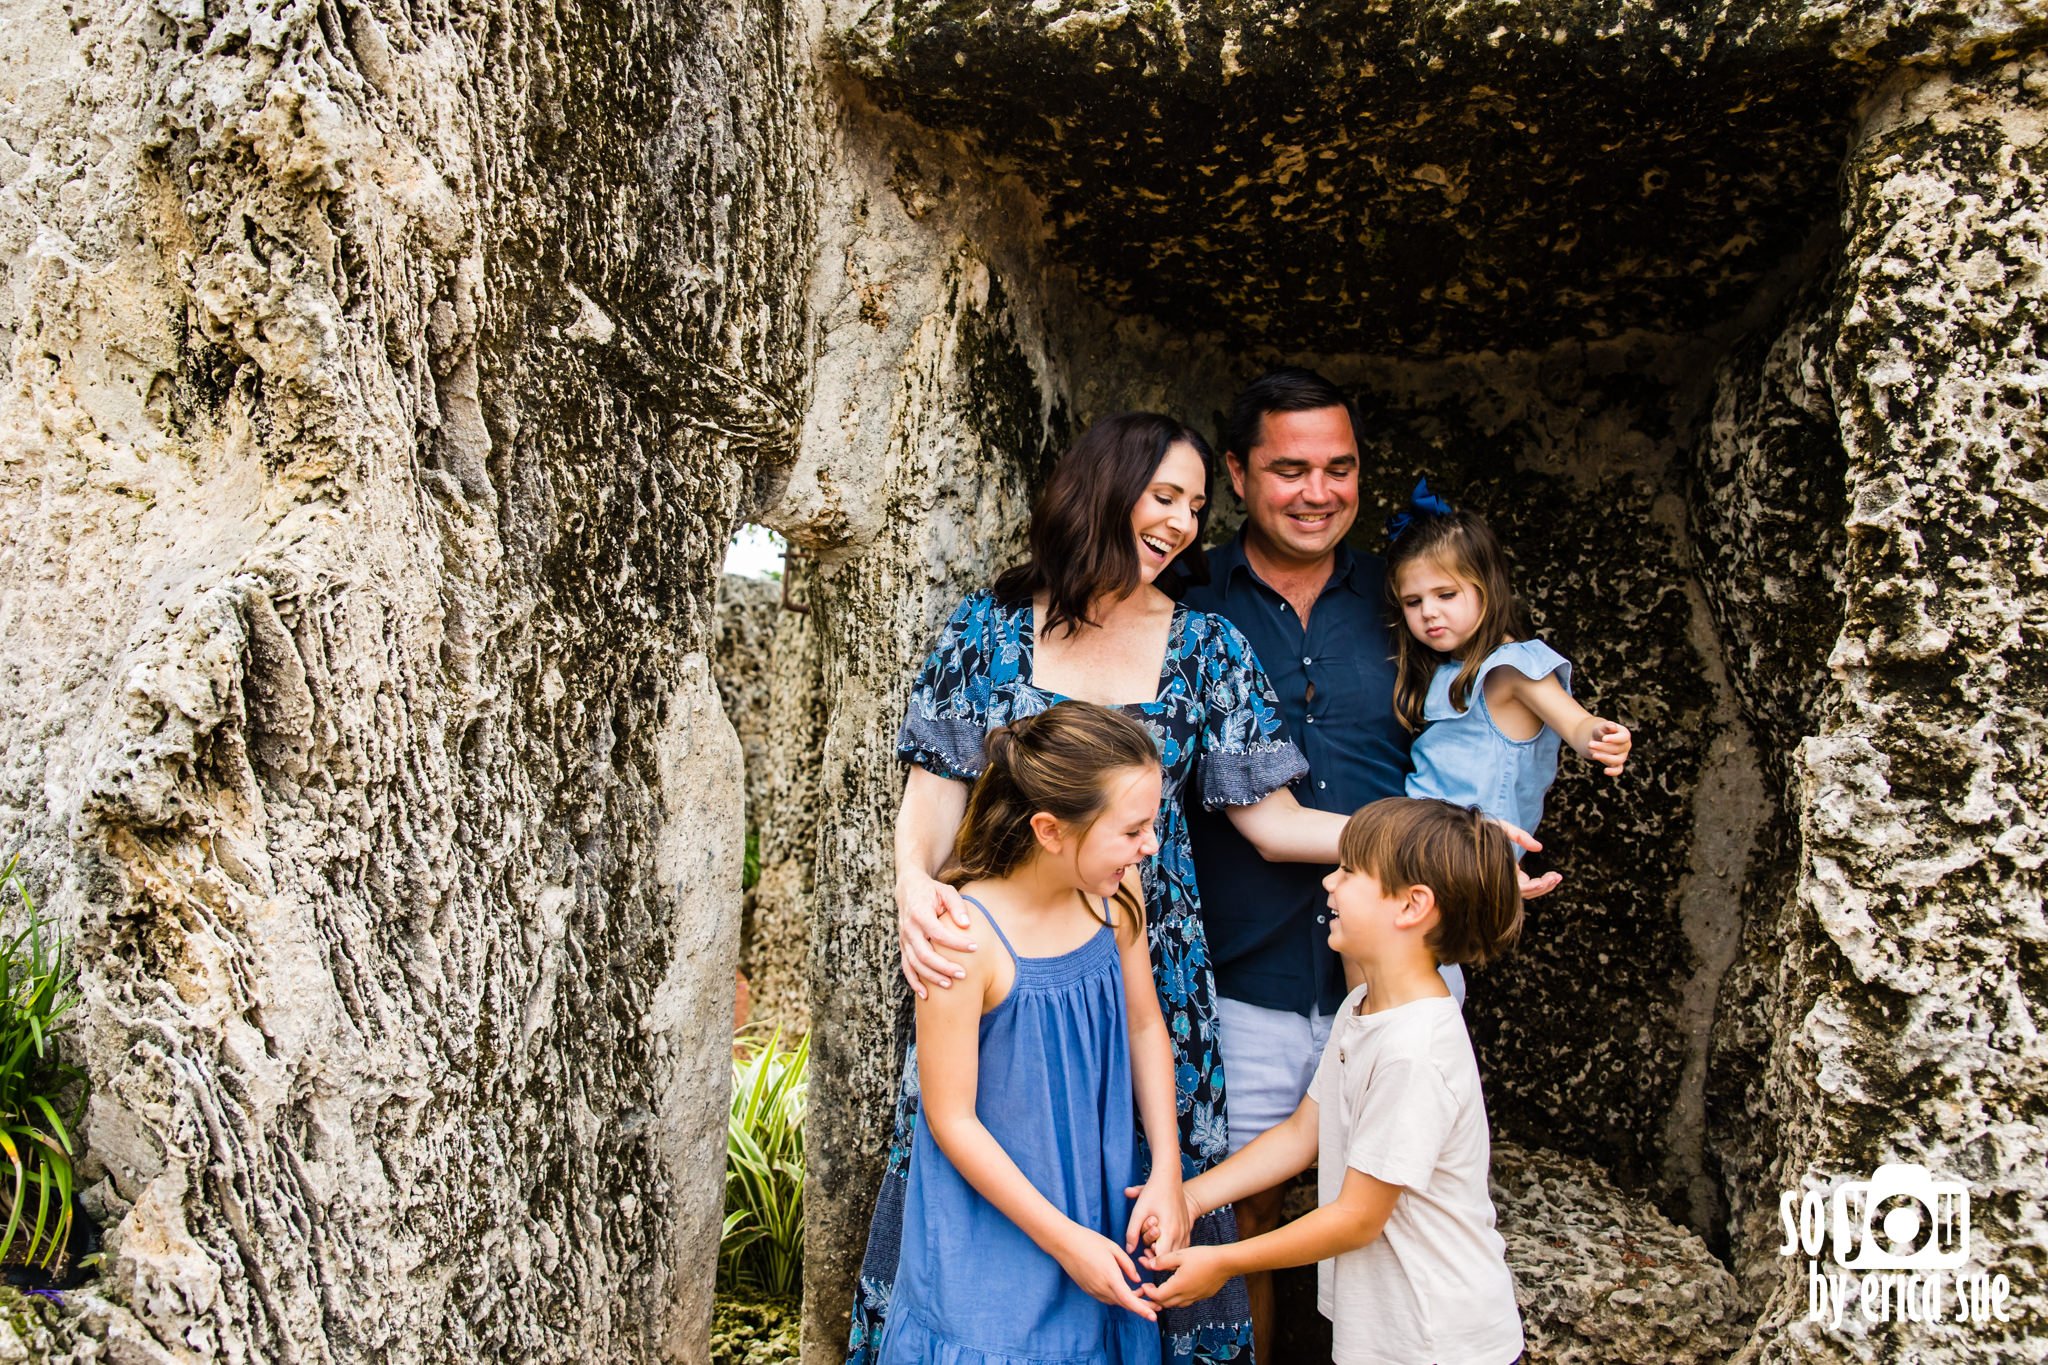 2-lifestyle-family-photographer-coral-castle-miami-fl-so-you-by-erica-sue-ES2_8778.jpg